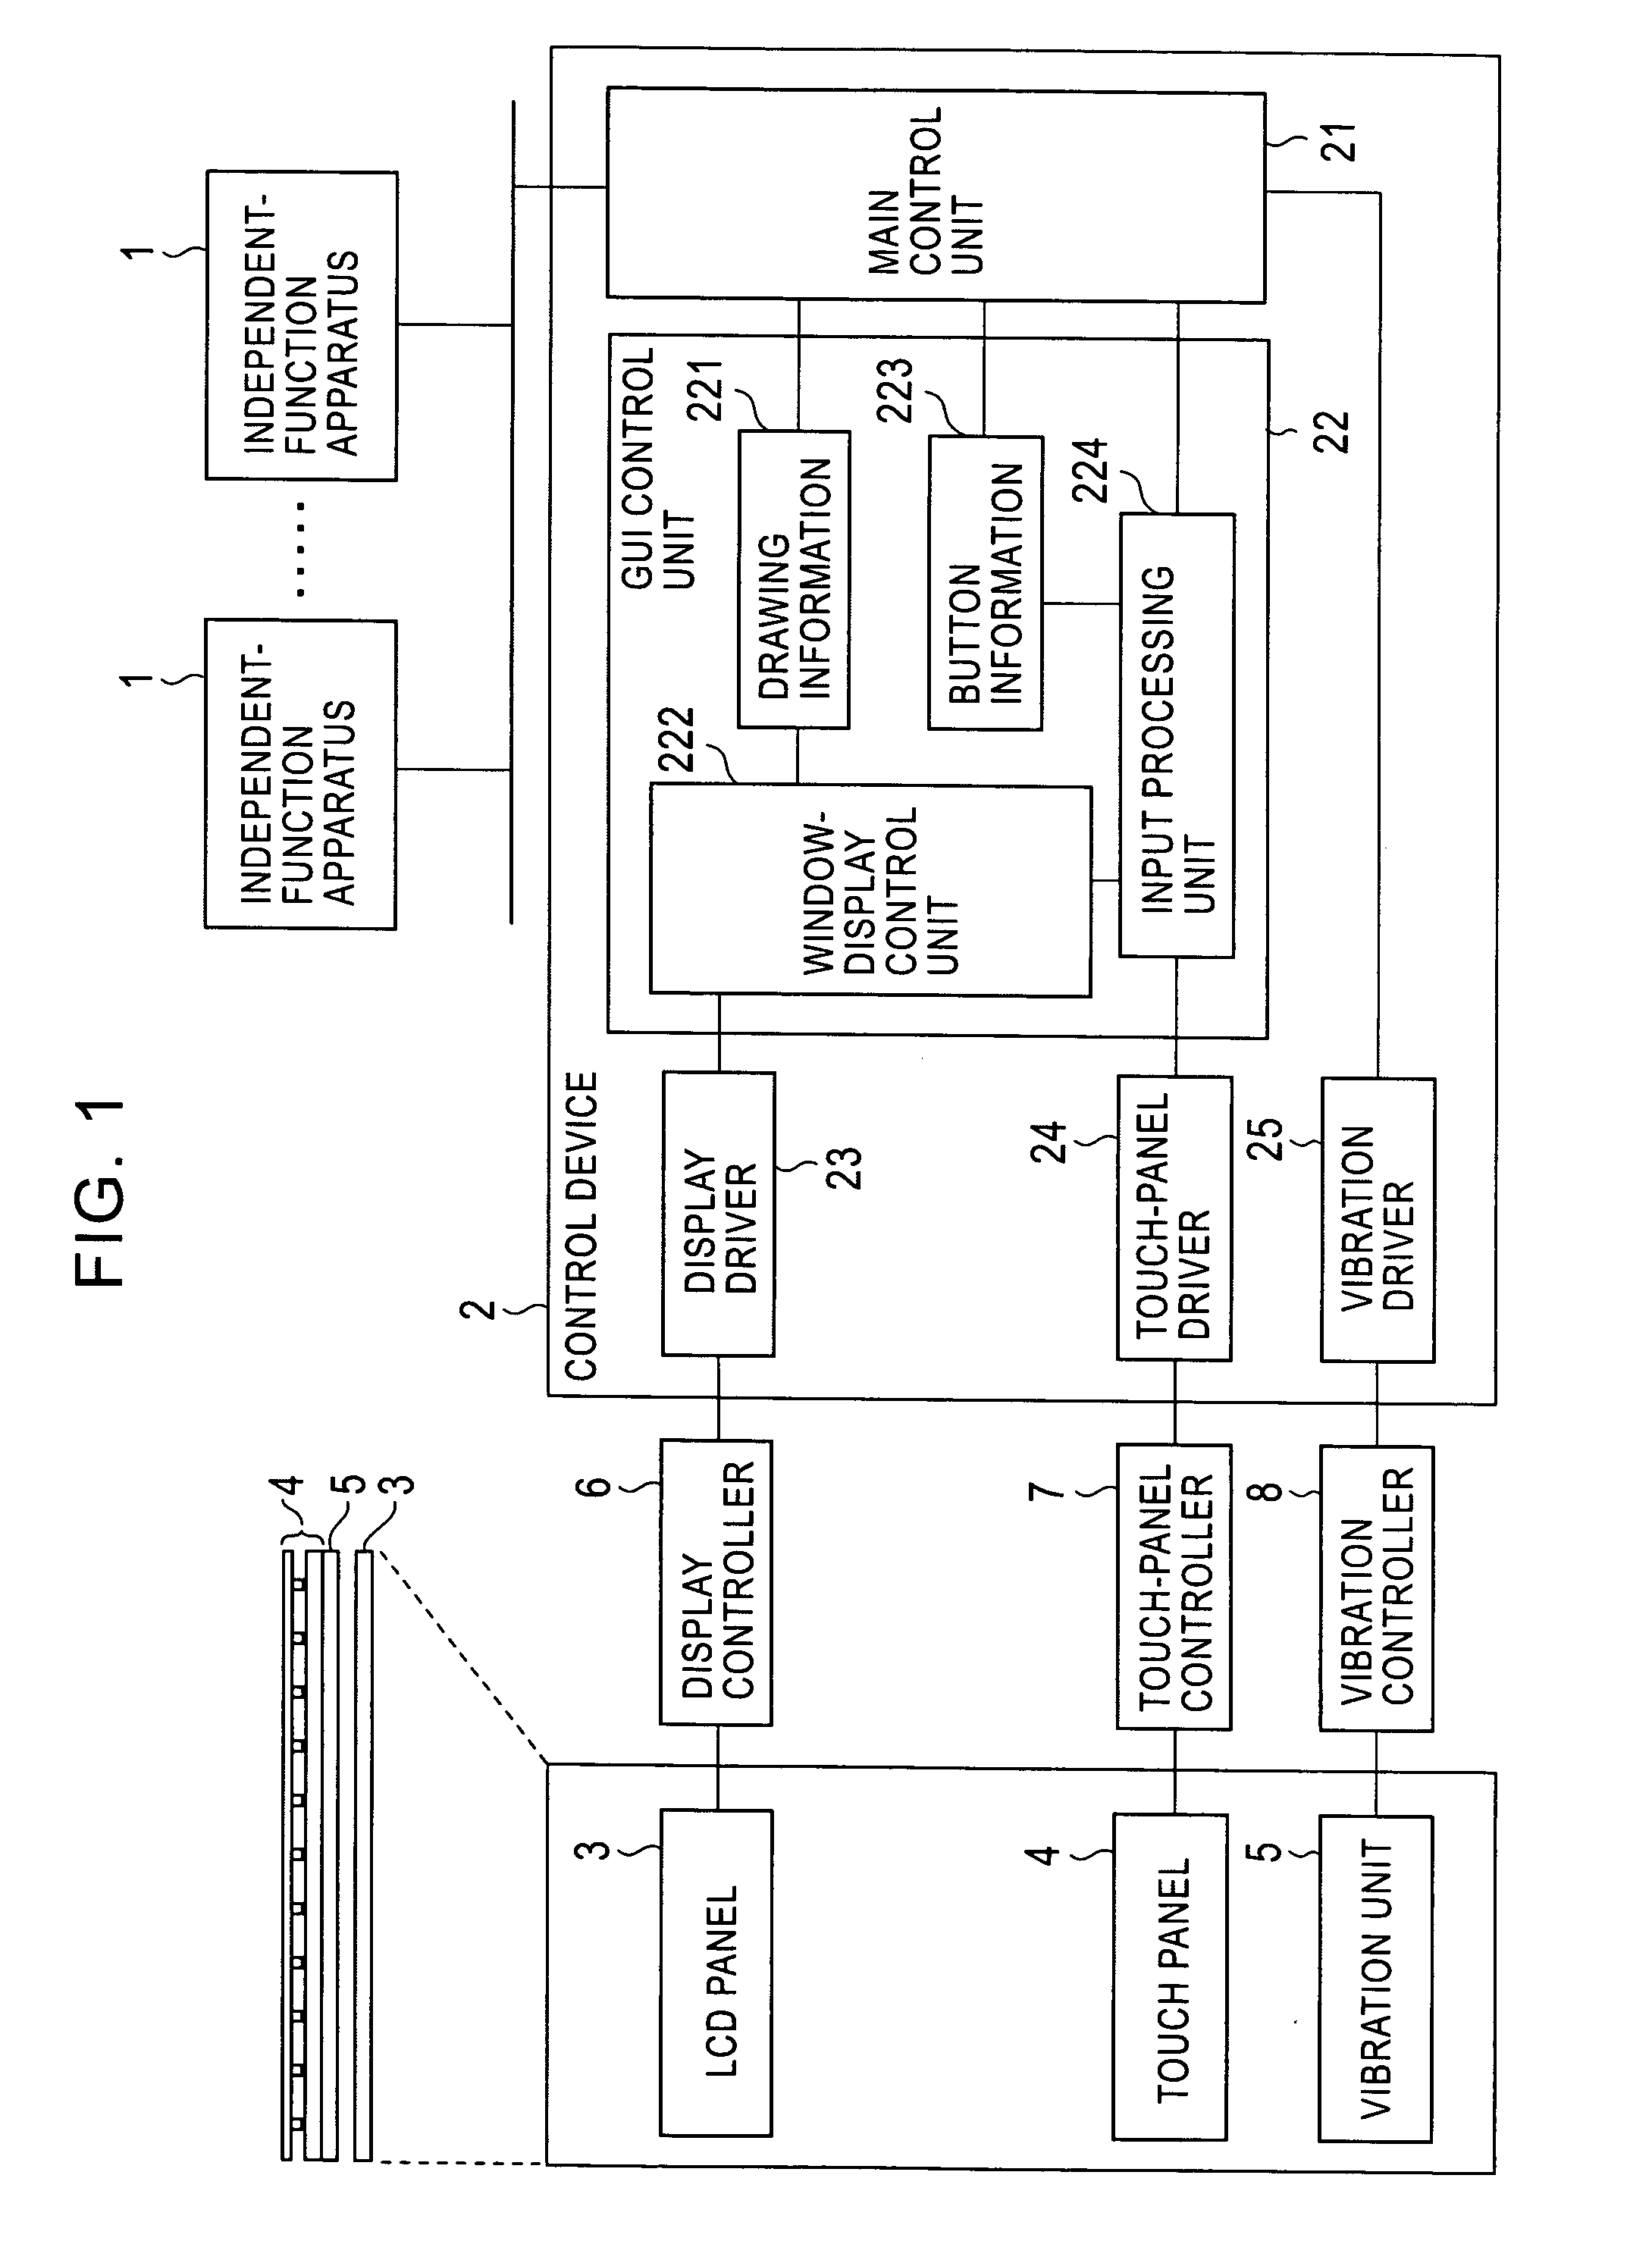 Input control apparatus and method for responding to input